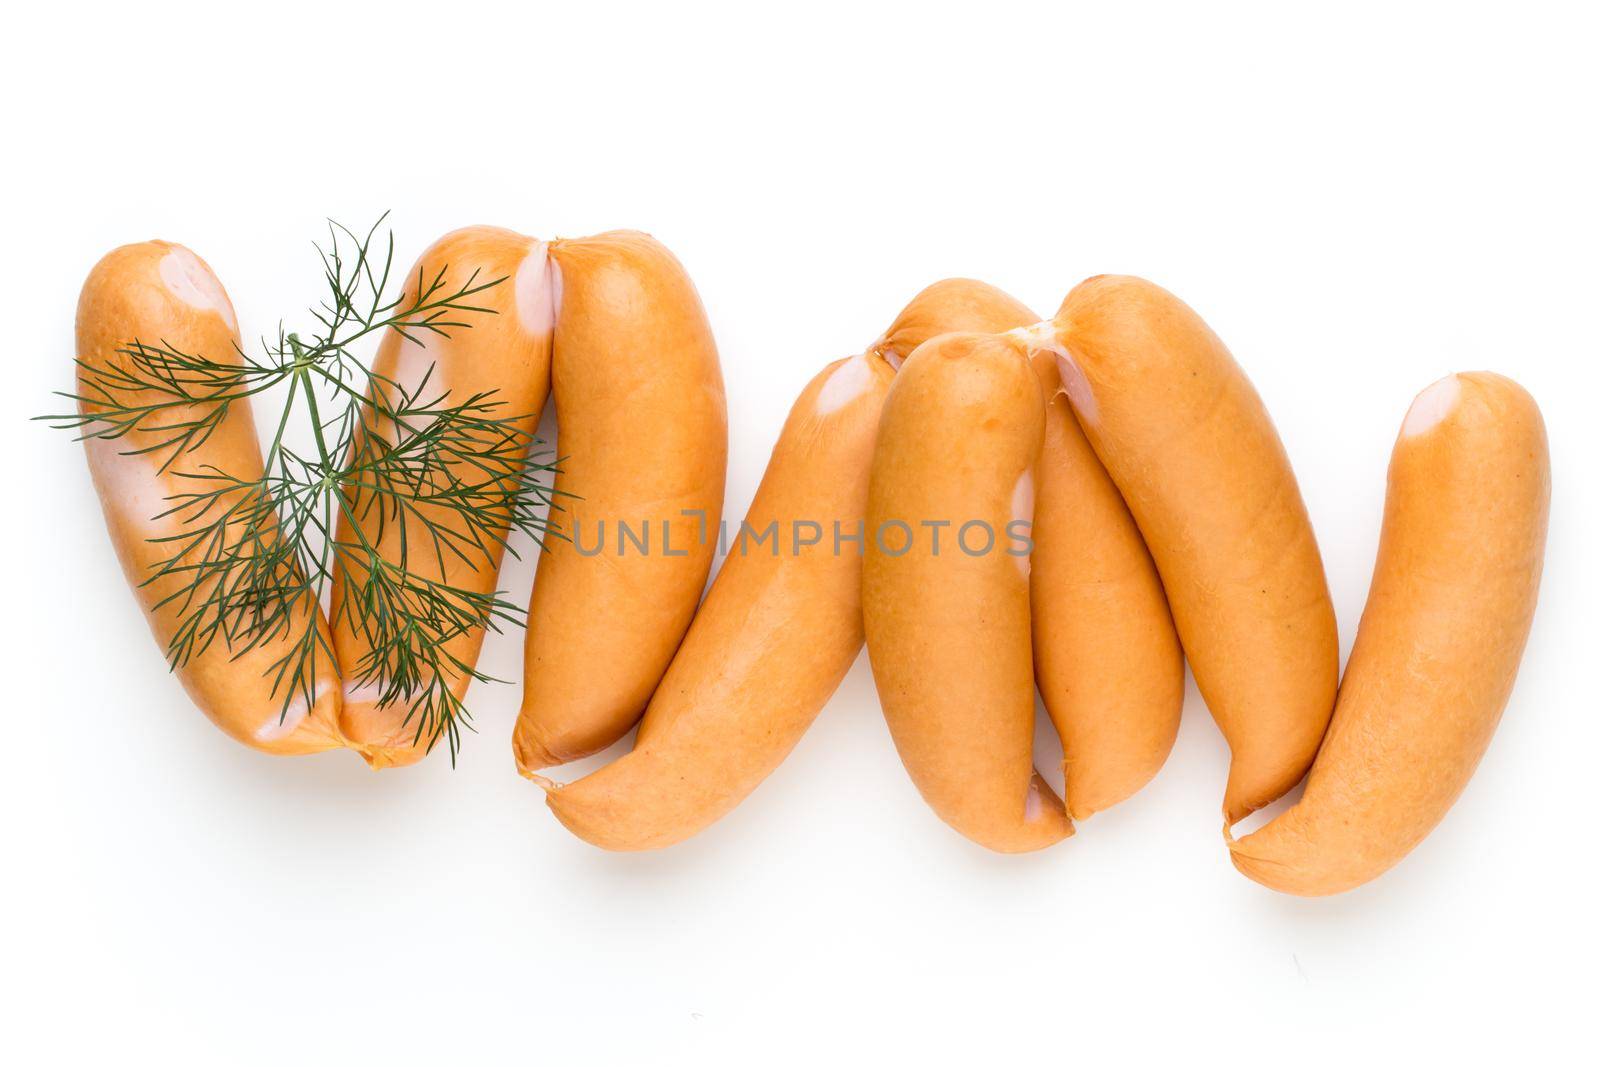 Pork sausage and spice isolated on white background.